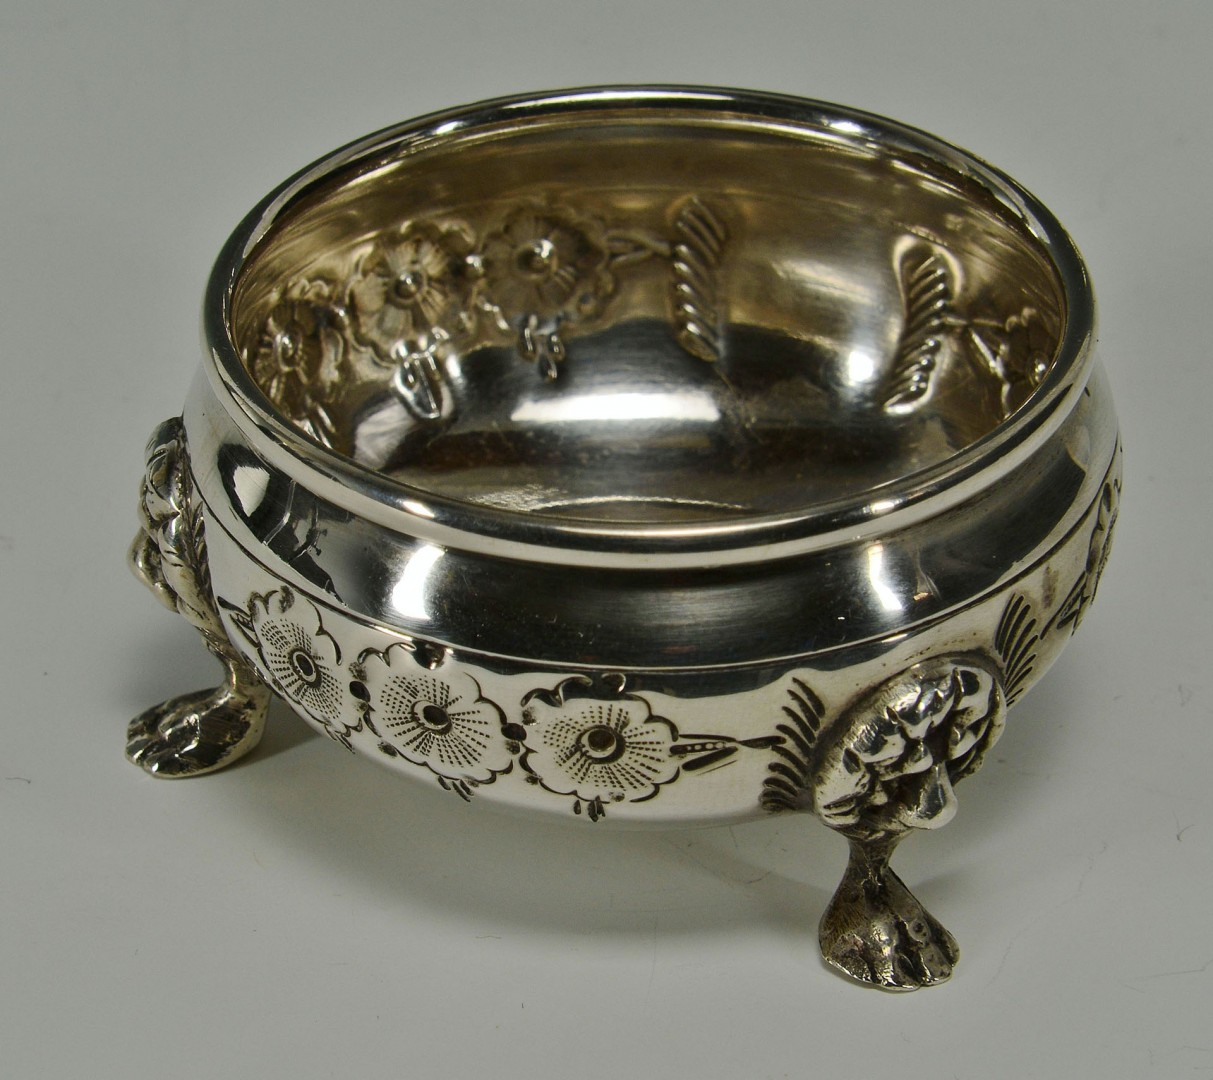 Lot 295: Hand chased sterling silver salts and peppers